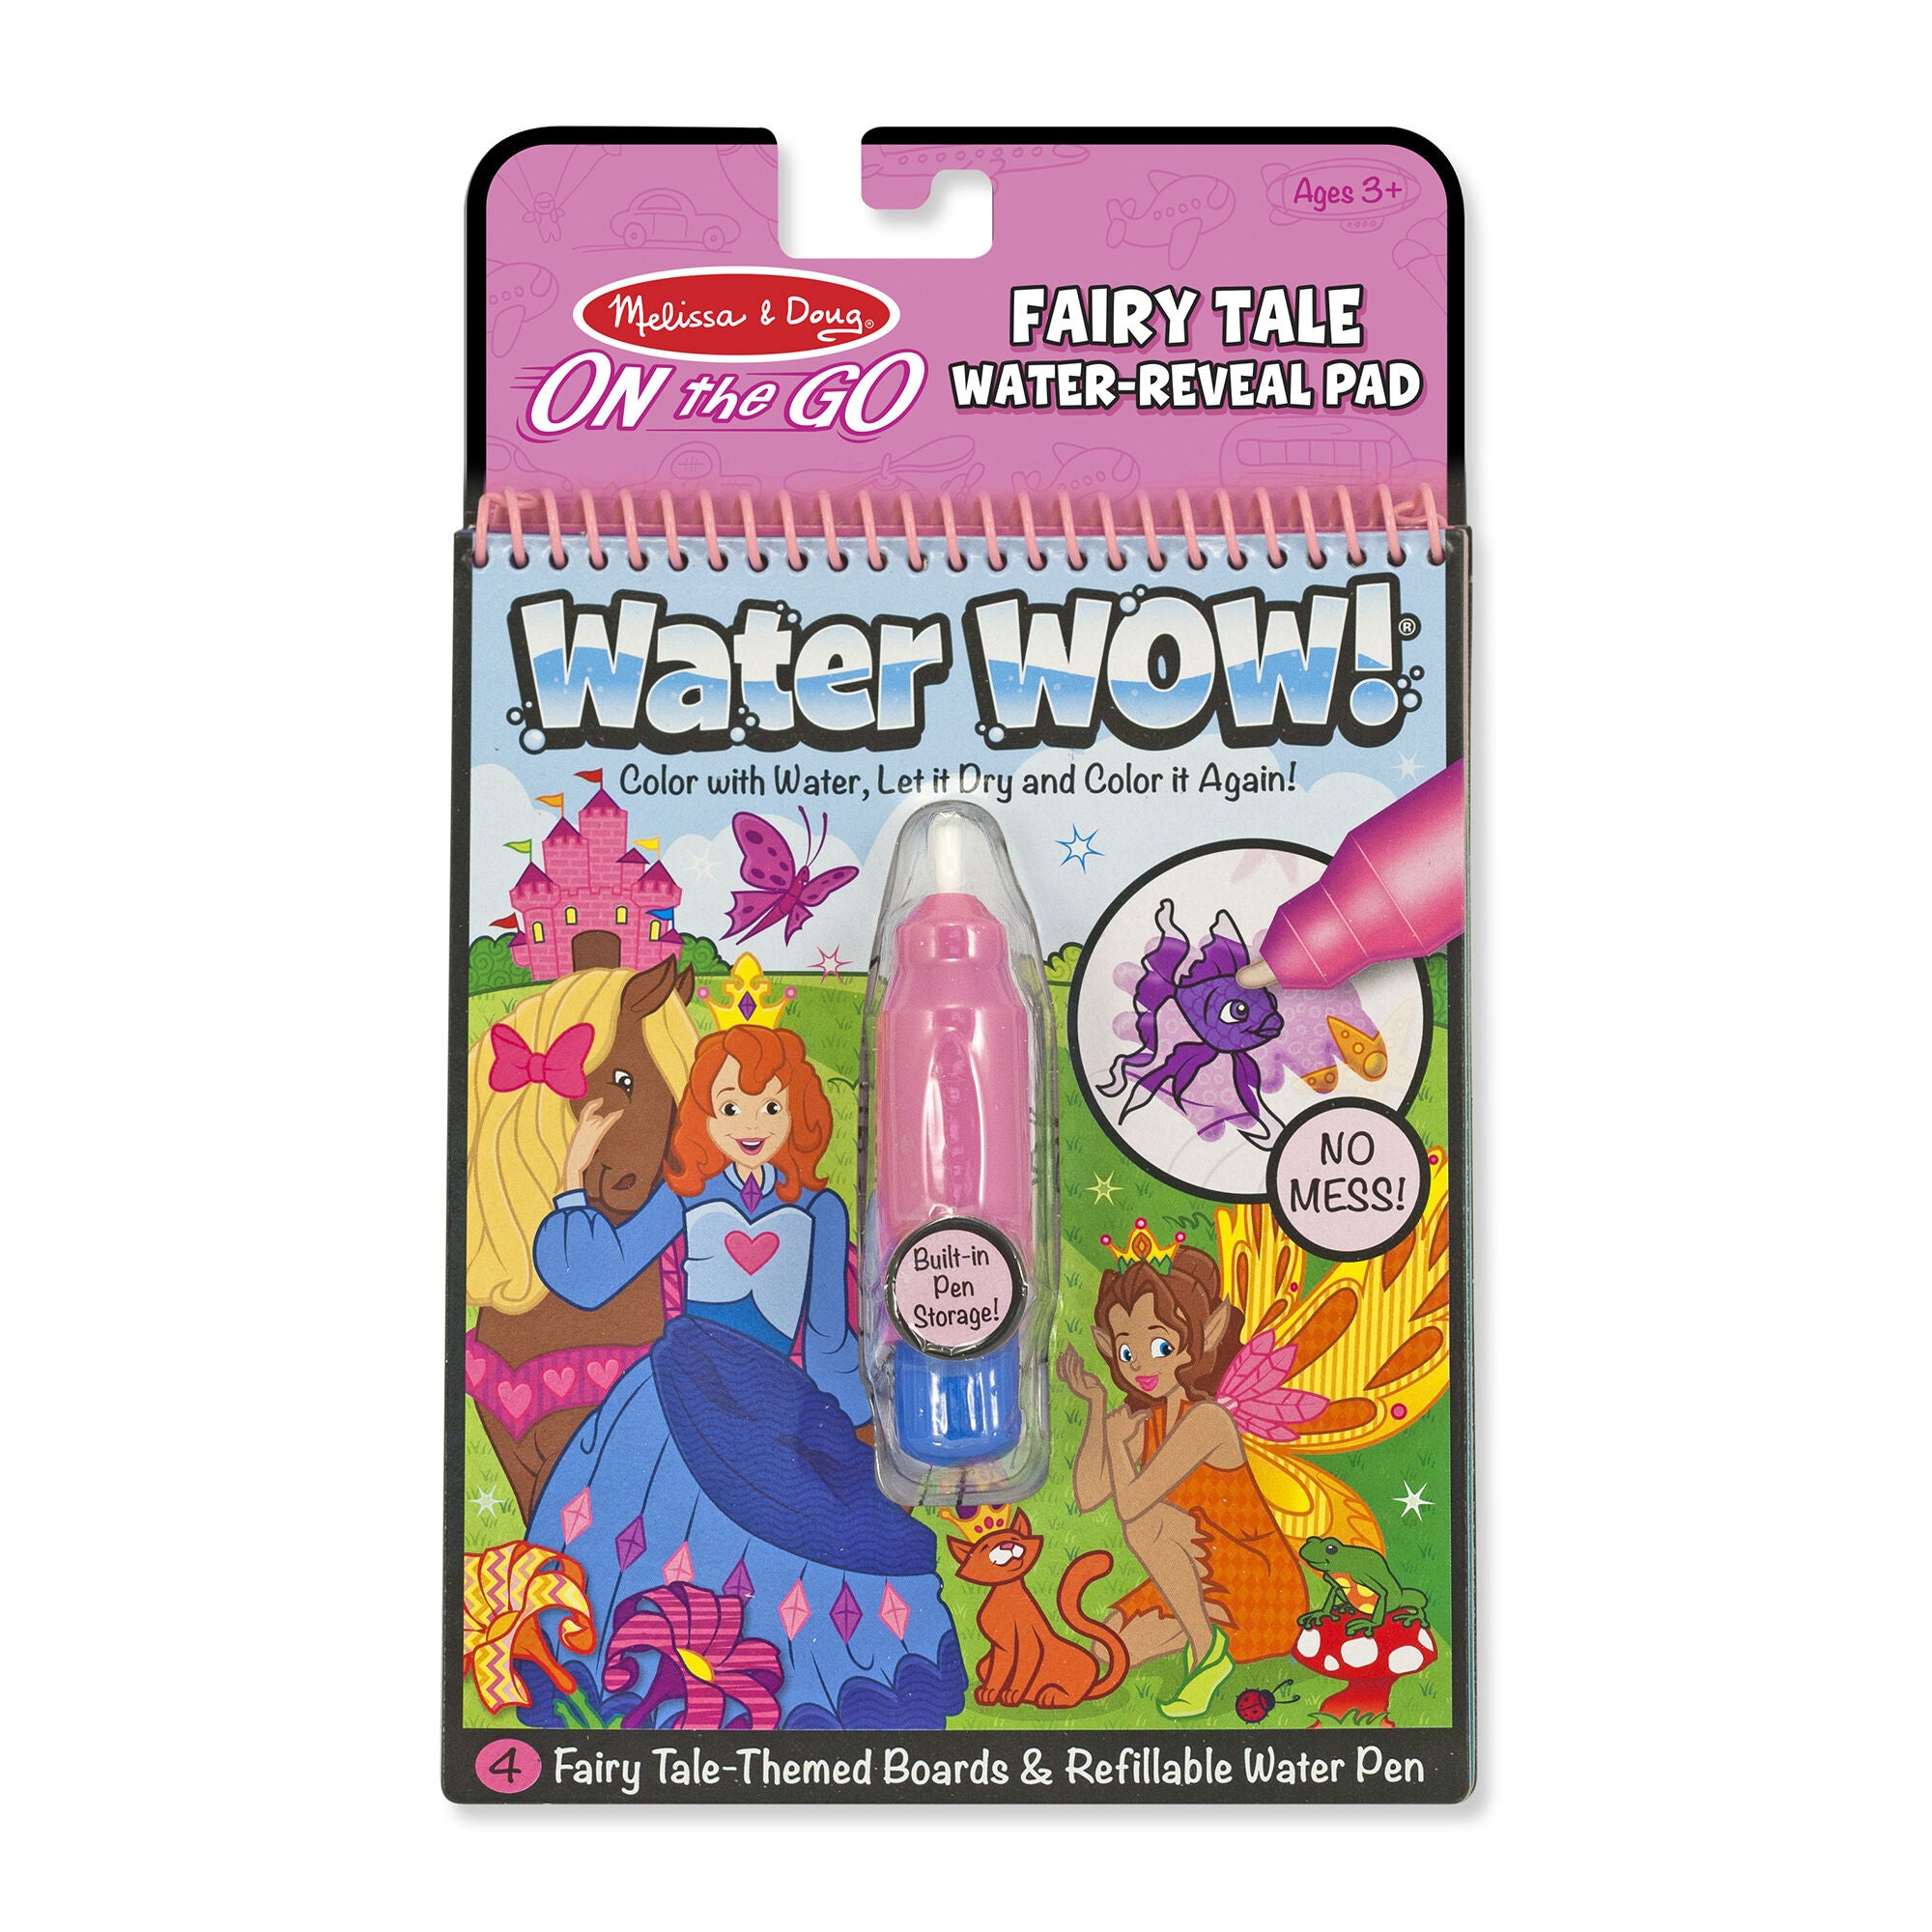 Melissa & Doug Water Wow! On The Go Water-Reveal Pad / Fairy Tale